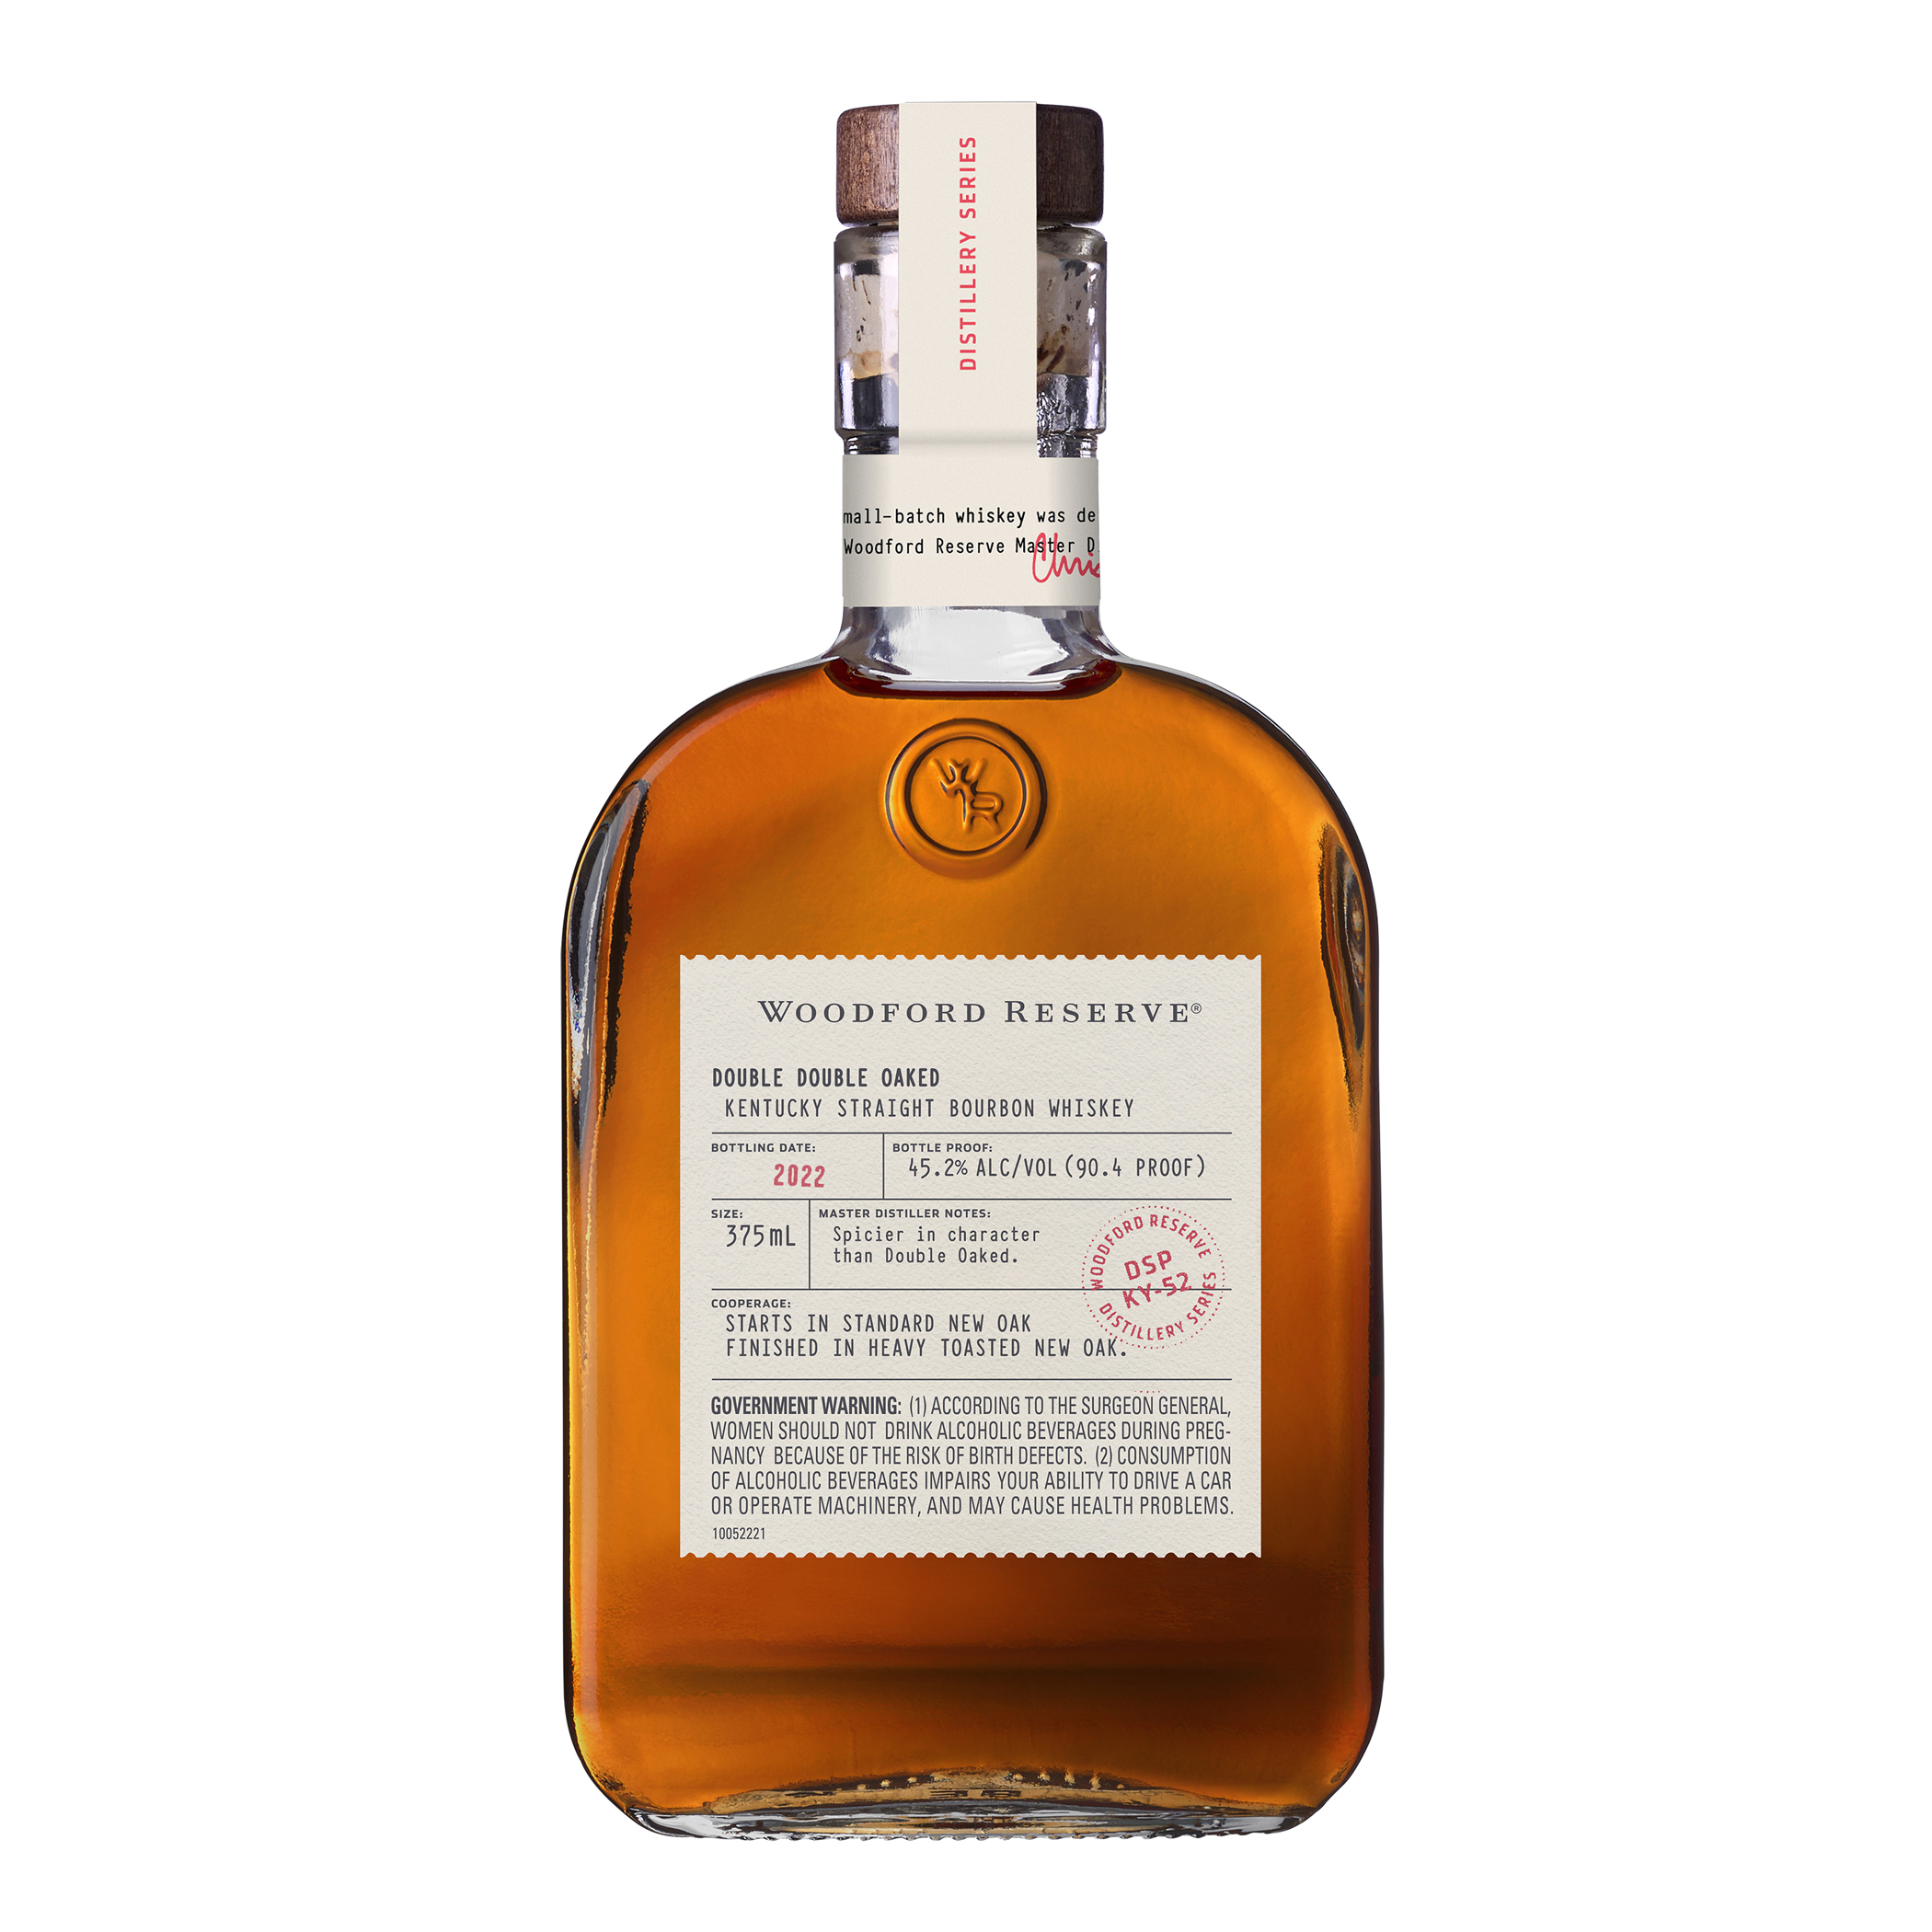 Woodford Reserve Double Double Oaked